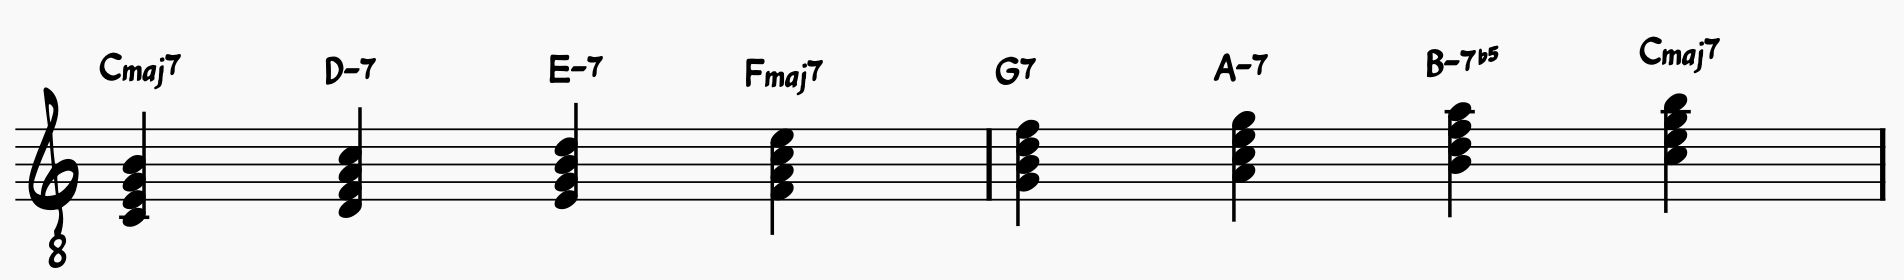 Diatonic Seventh Chords In The Key of C